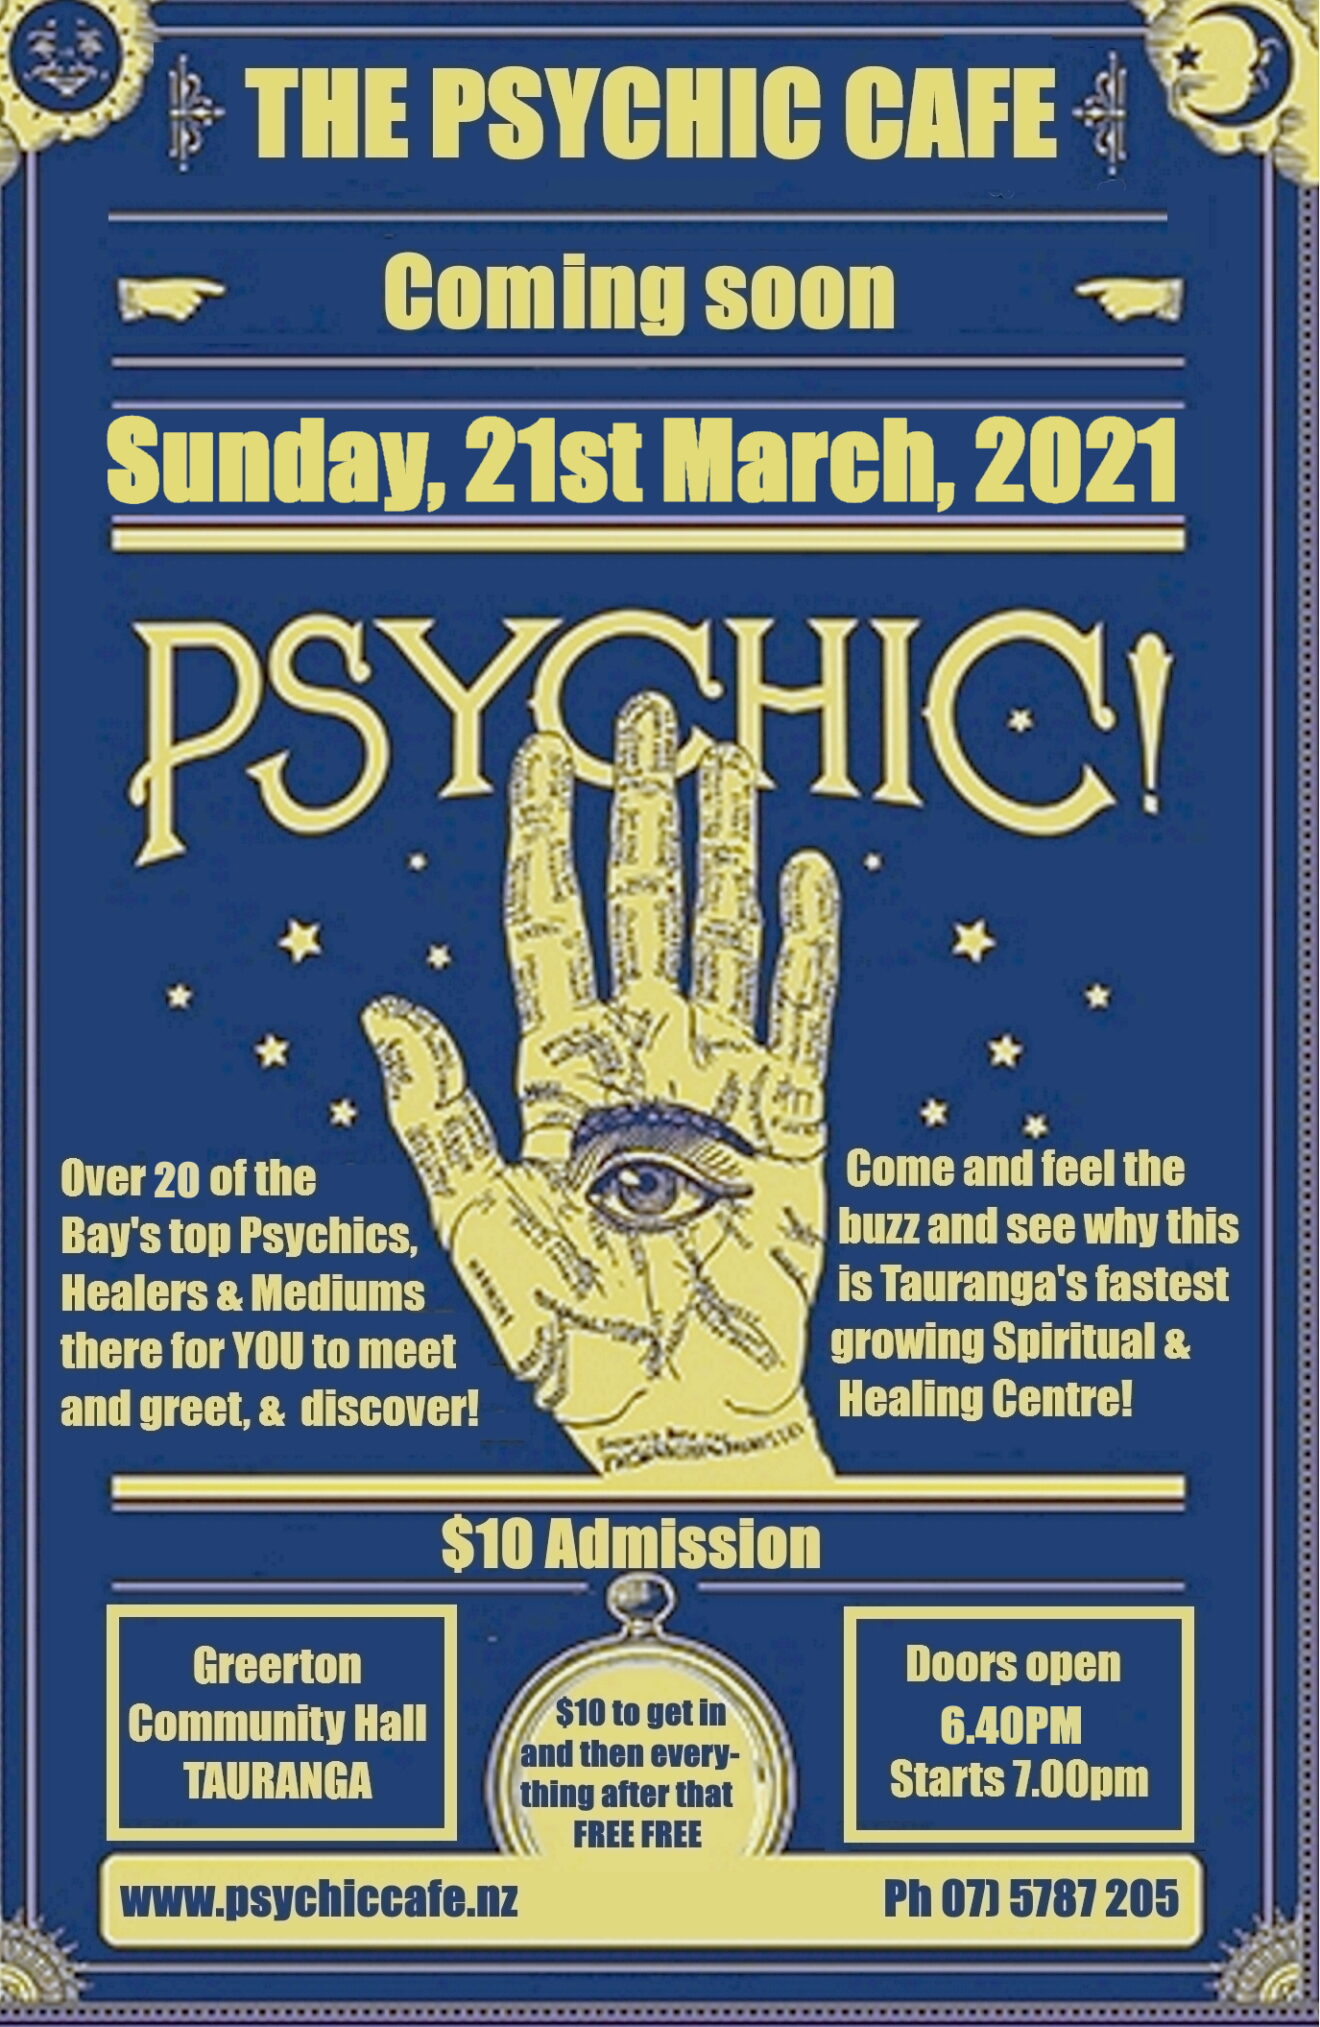 Psychic Cafe Meets 21st March, 2021